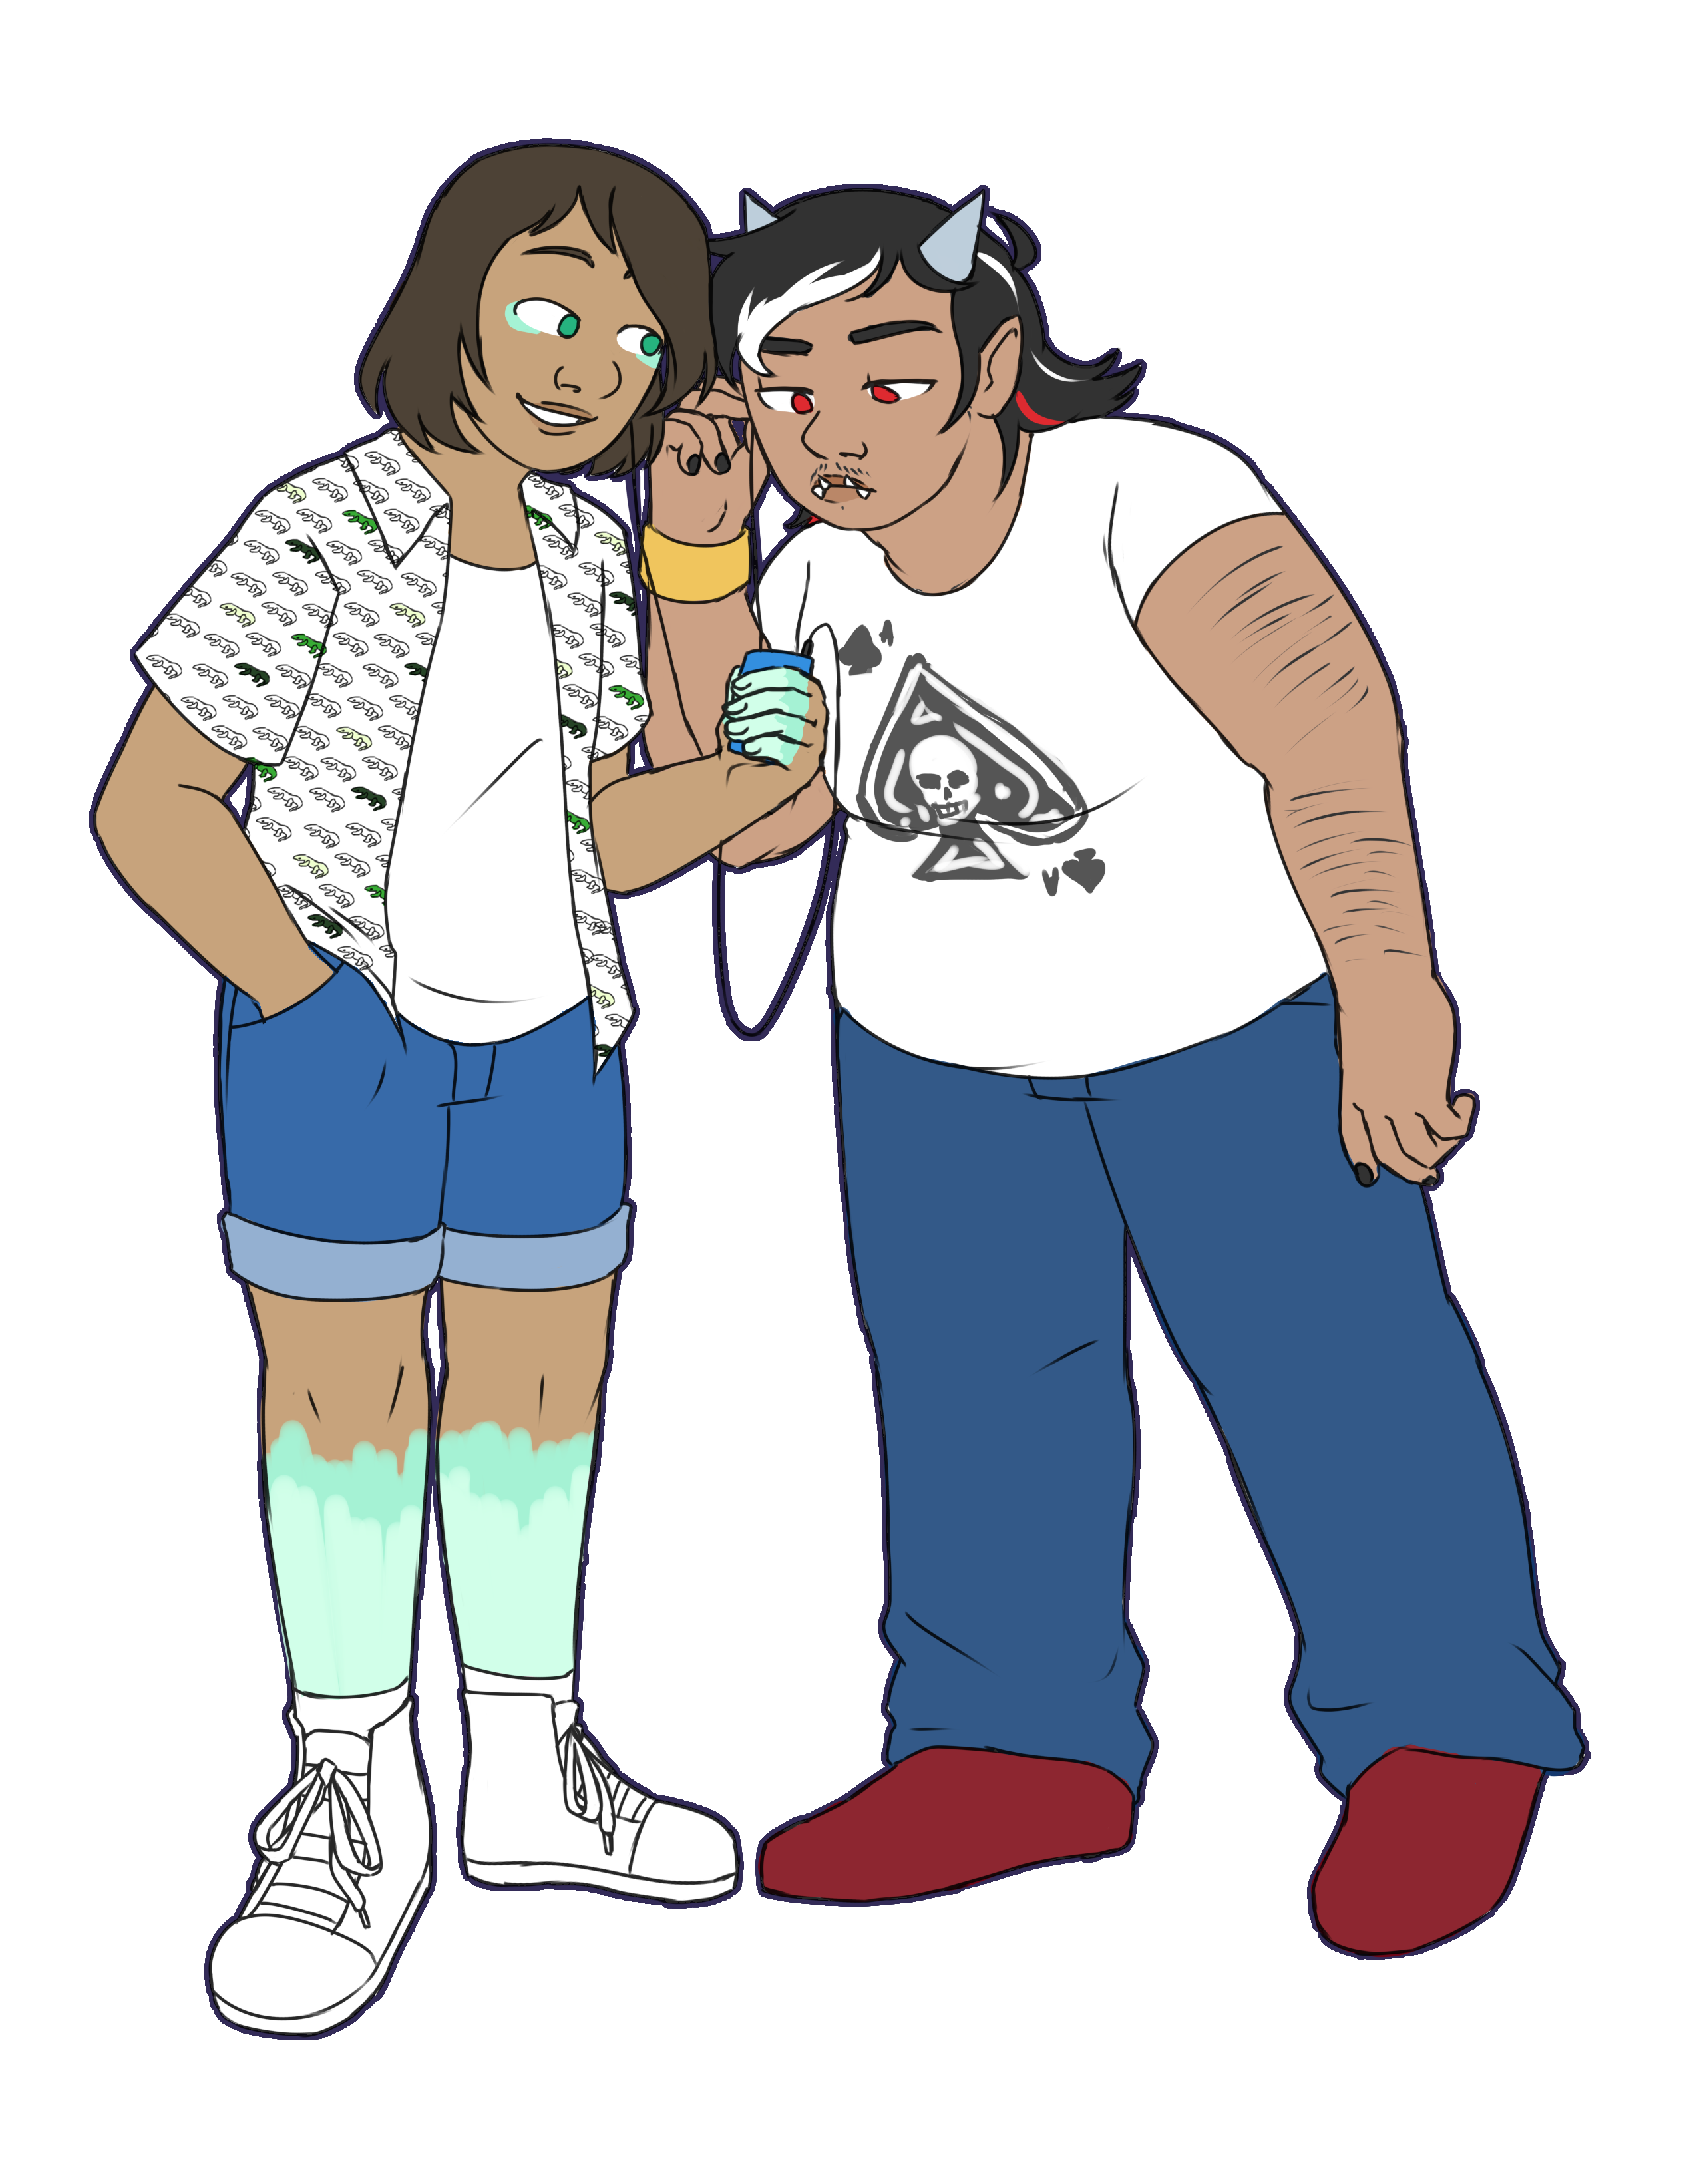 a drawing of Captain Murasa and Kijin Seija from Touhou. They're wearing modern casual clothes; Murasa has a button up patterned with lizards, denim capris, and Converse shoes, and Seija has a t-shirt with a spade design with a skull in the center, jeans, and red boots. Murasa is holding an MP3 player and they're sharing a pair of wired earbuds; Murasa seems to be showing Seija something